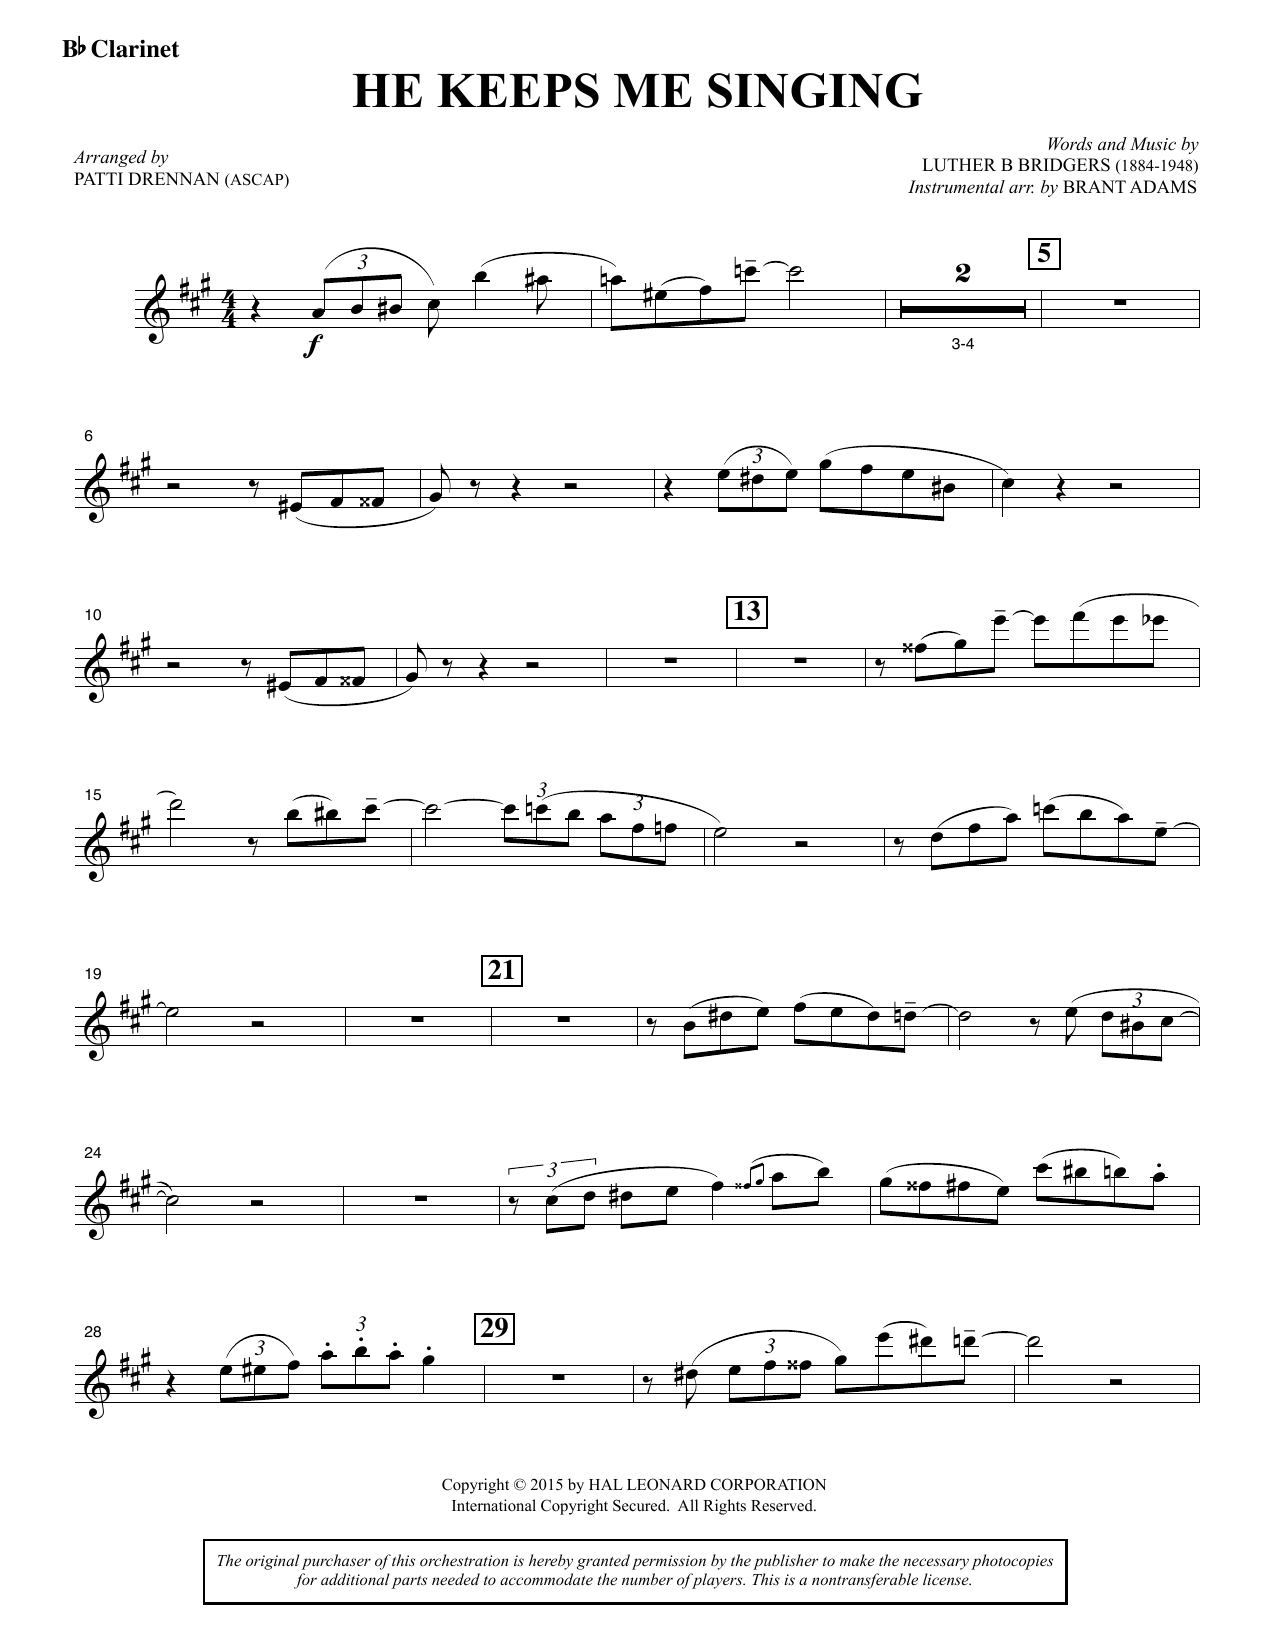 Luther B. Bridgers He Keeps Me Singing - Bb Clarinet sheet music notes and chords. Download Printable PDF.